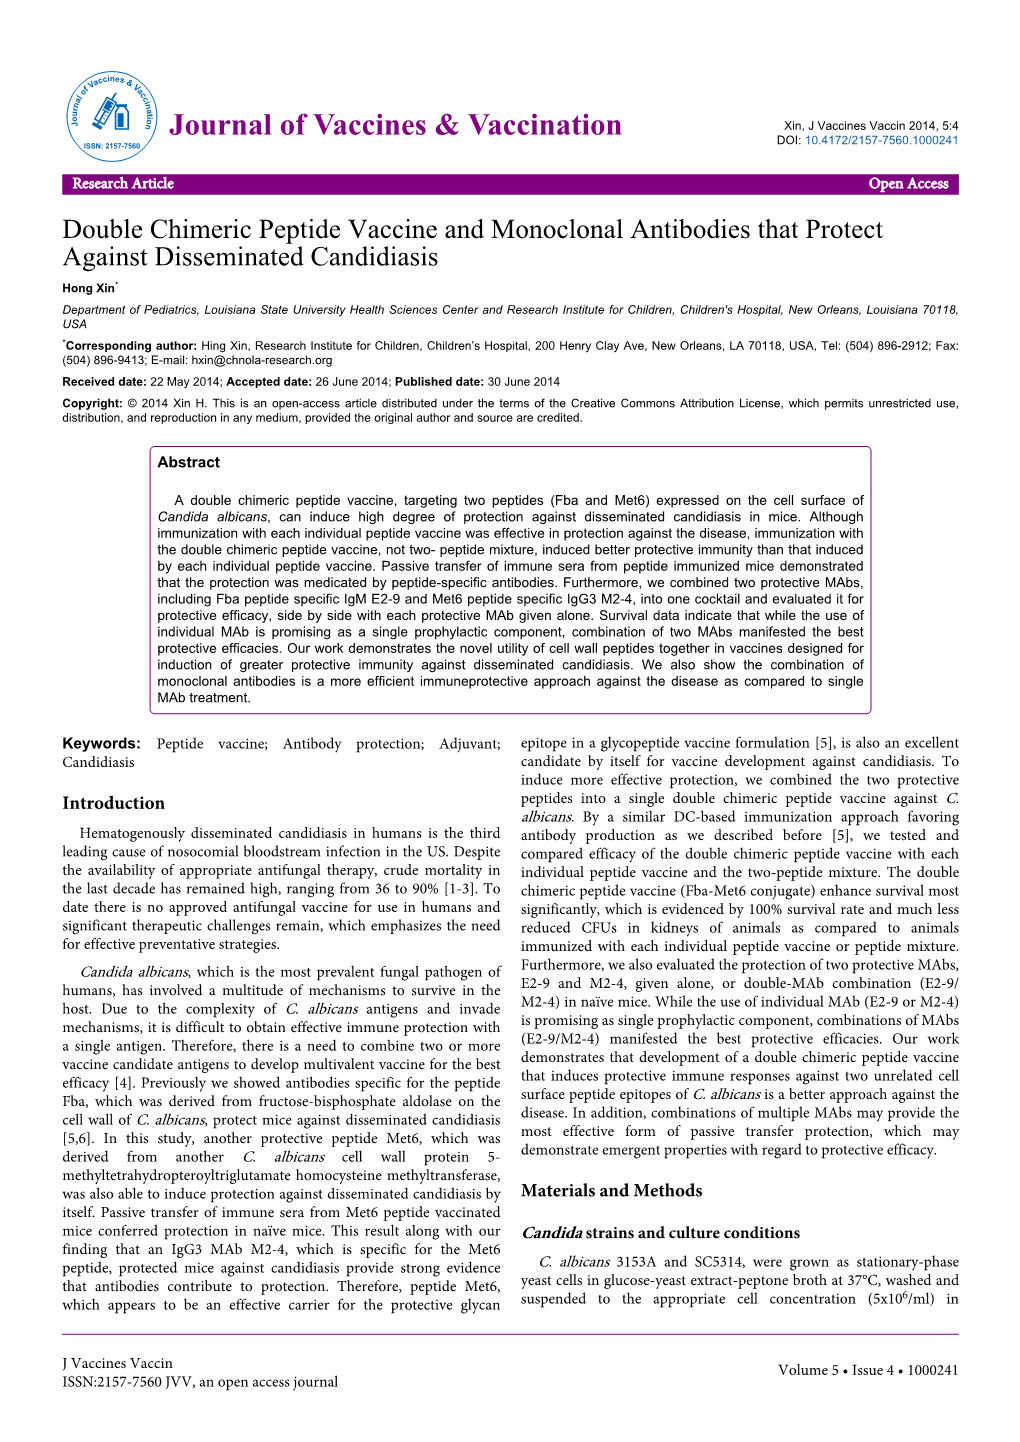 Double Chimeric Peptide Vaccine and Monoclonal Antibodies That Protect